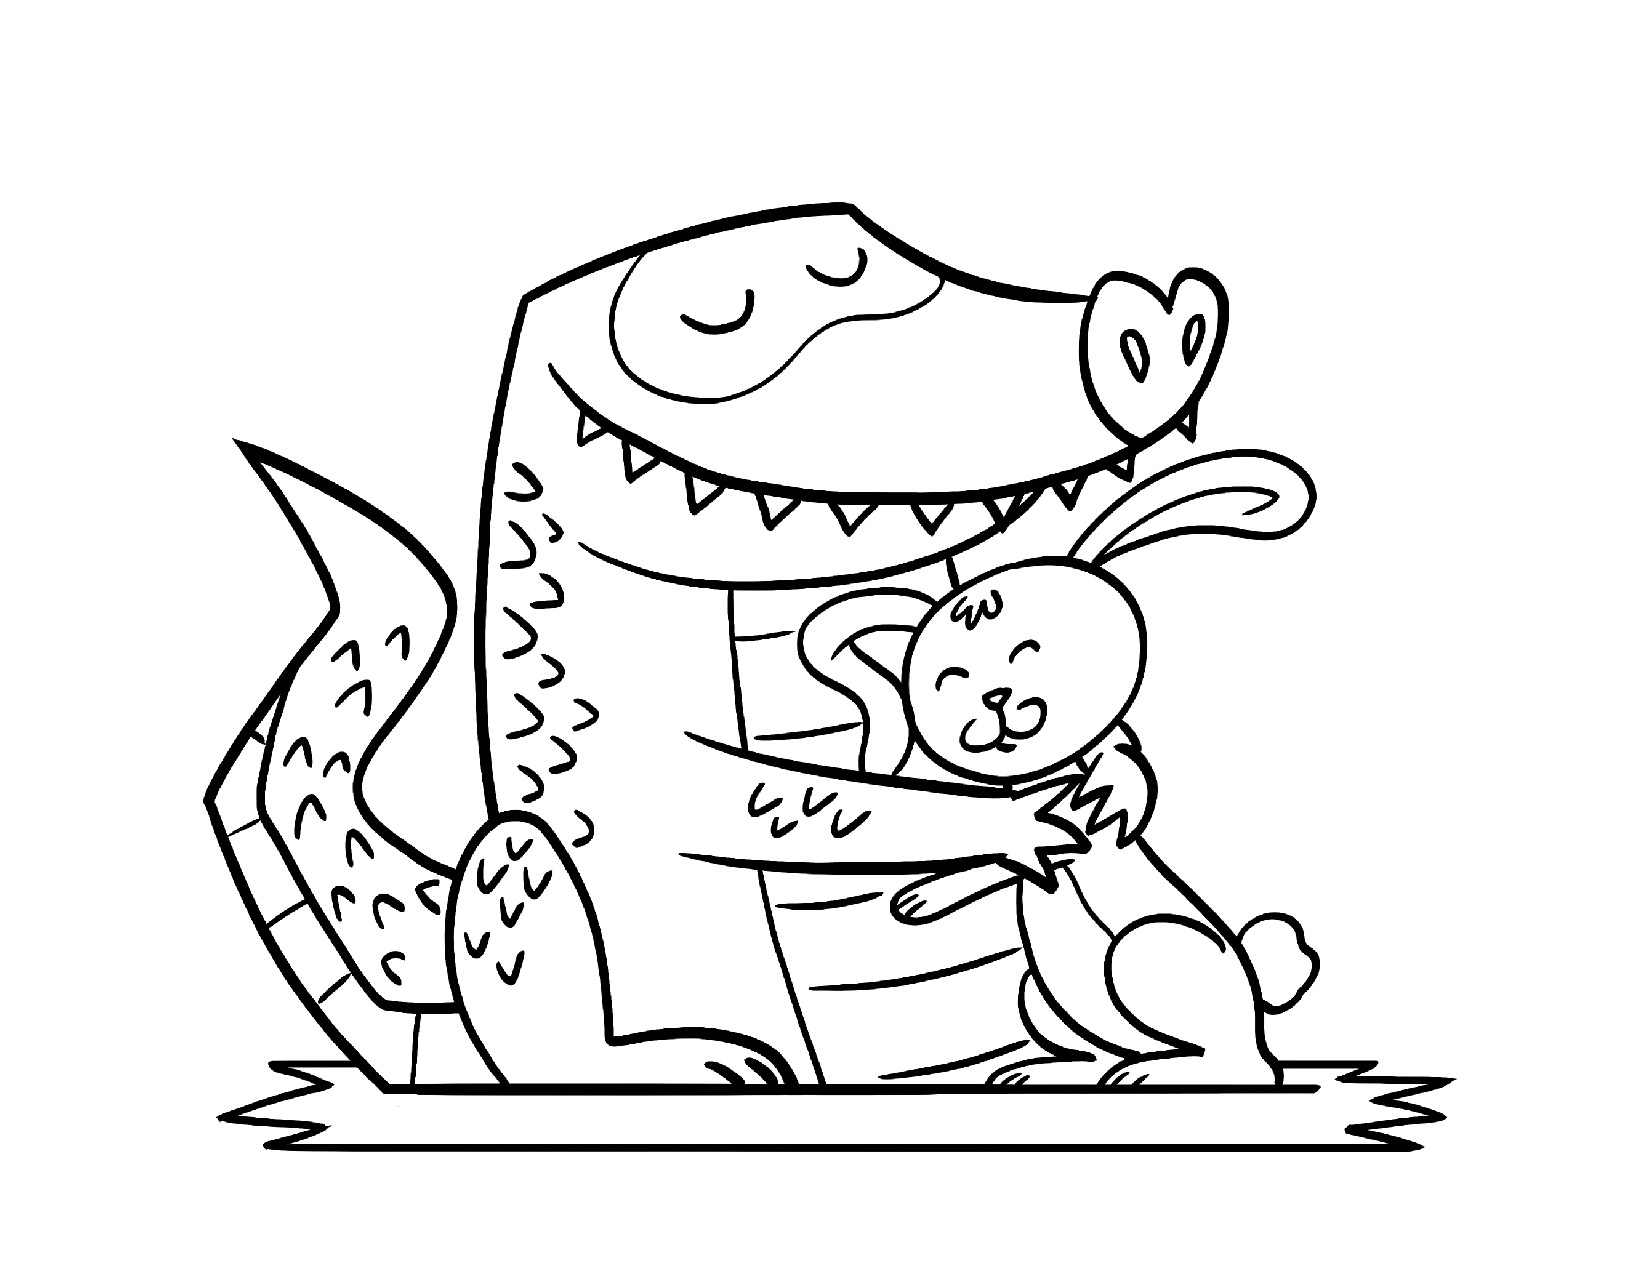 Coloring page of an alligator and rabbit hugging each other